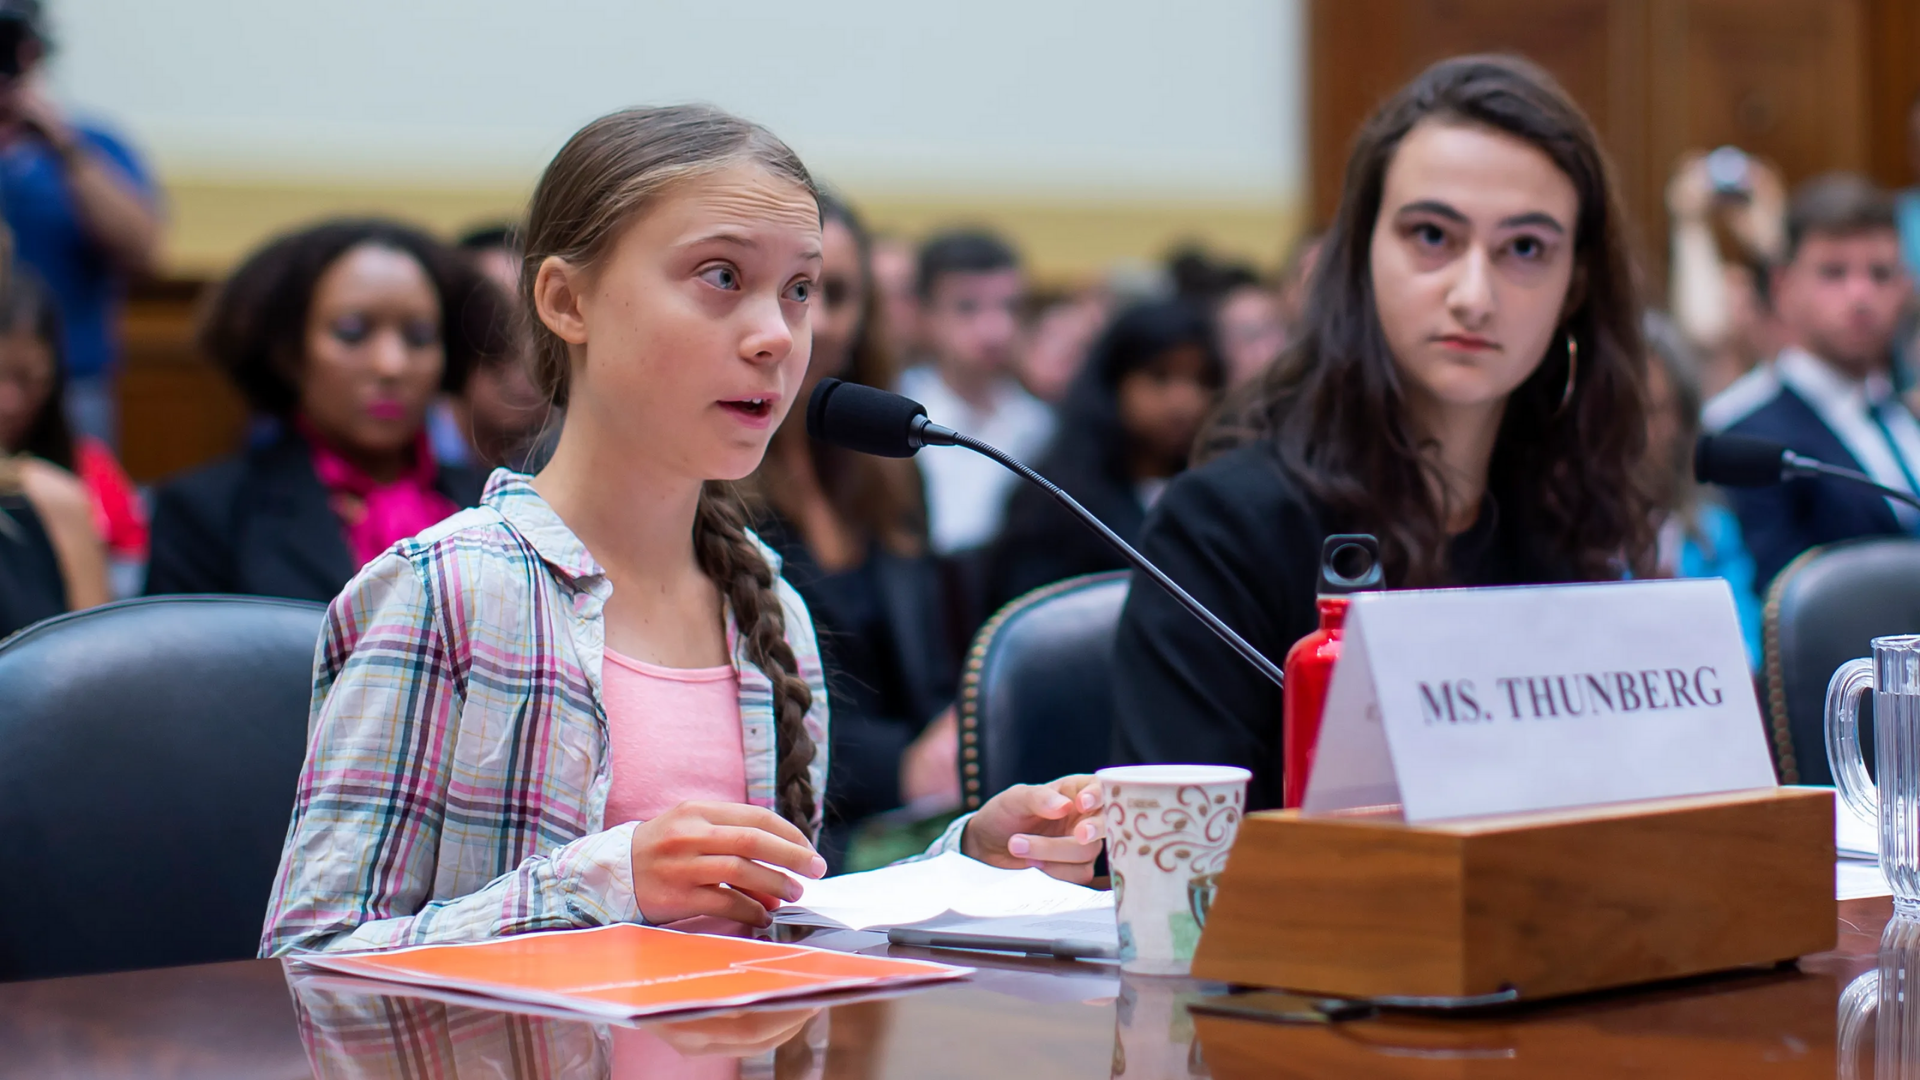 Greta Thunberg, sat talking into a microphone with a crowd of witnesses sat behind her.